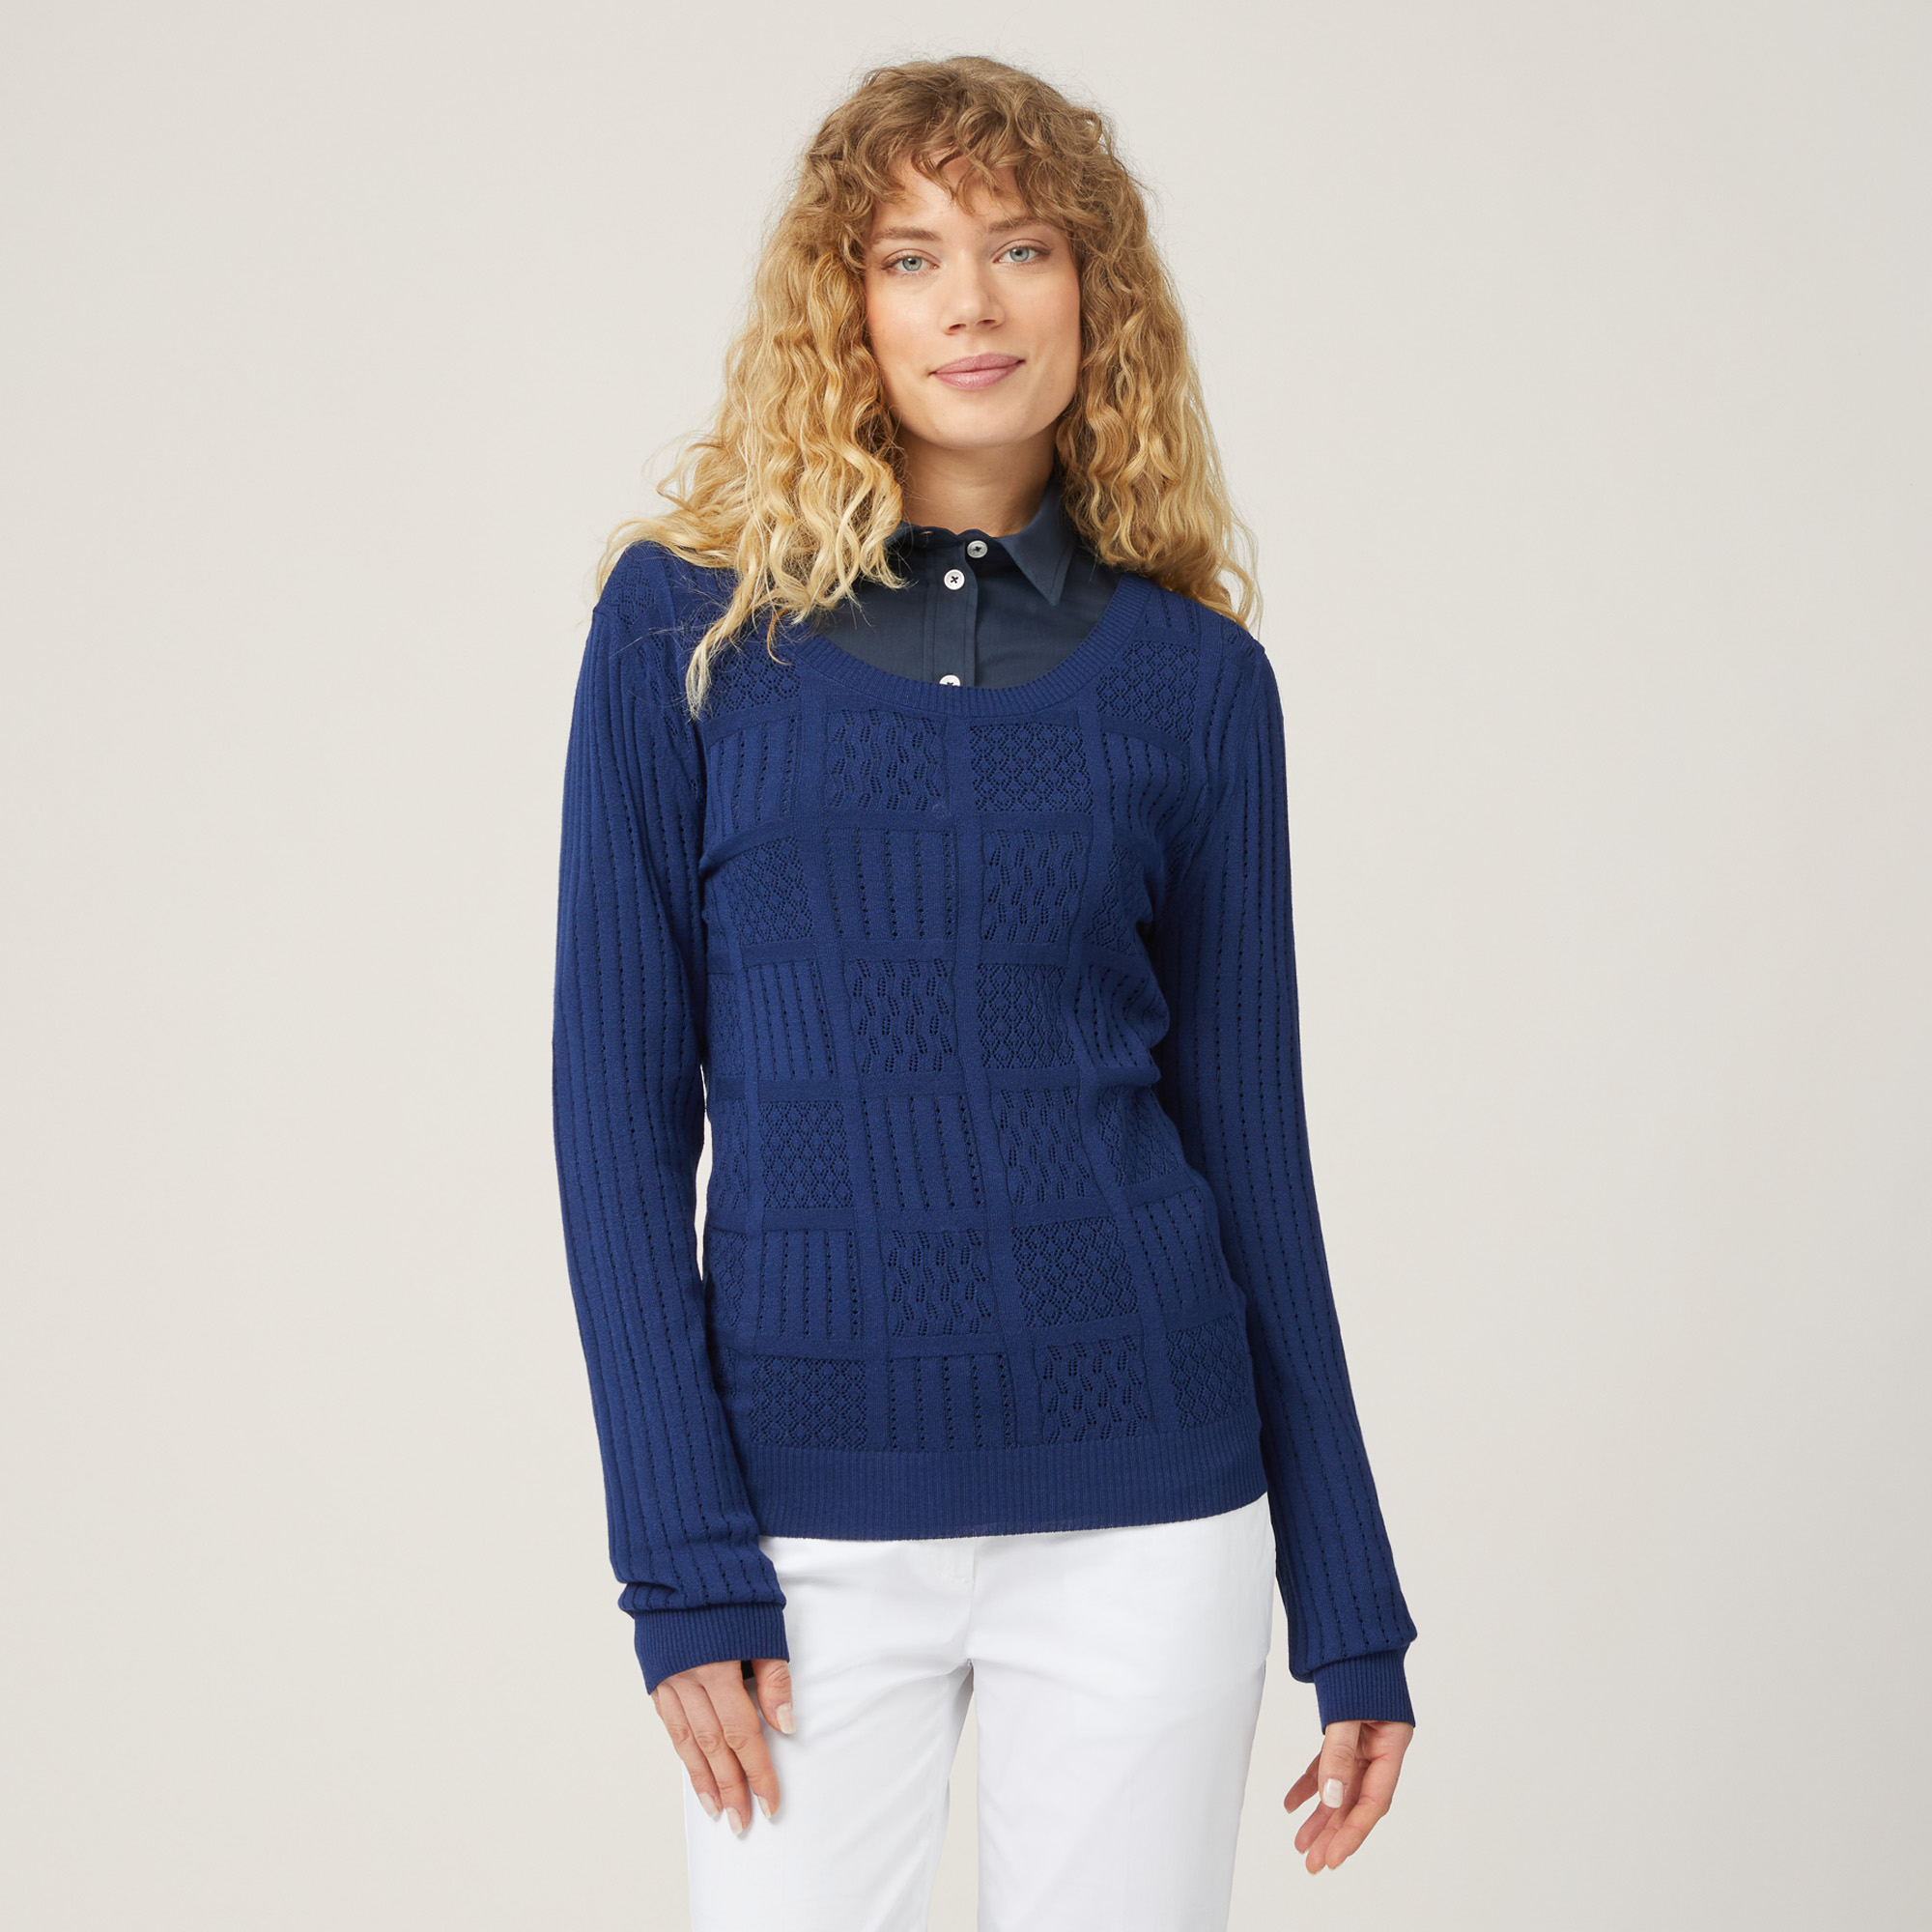 Mixed Stitch Sweater, Blue, large image number 0